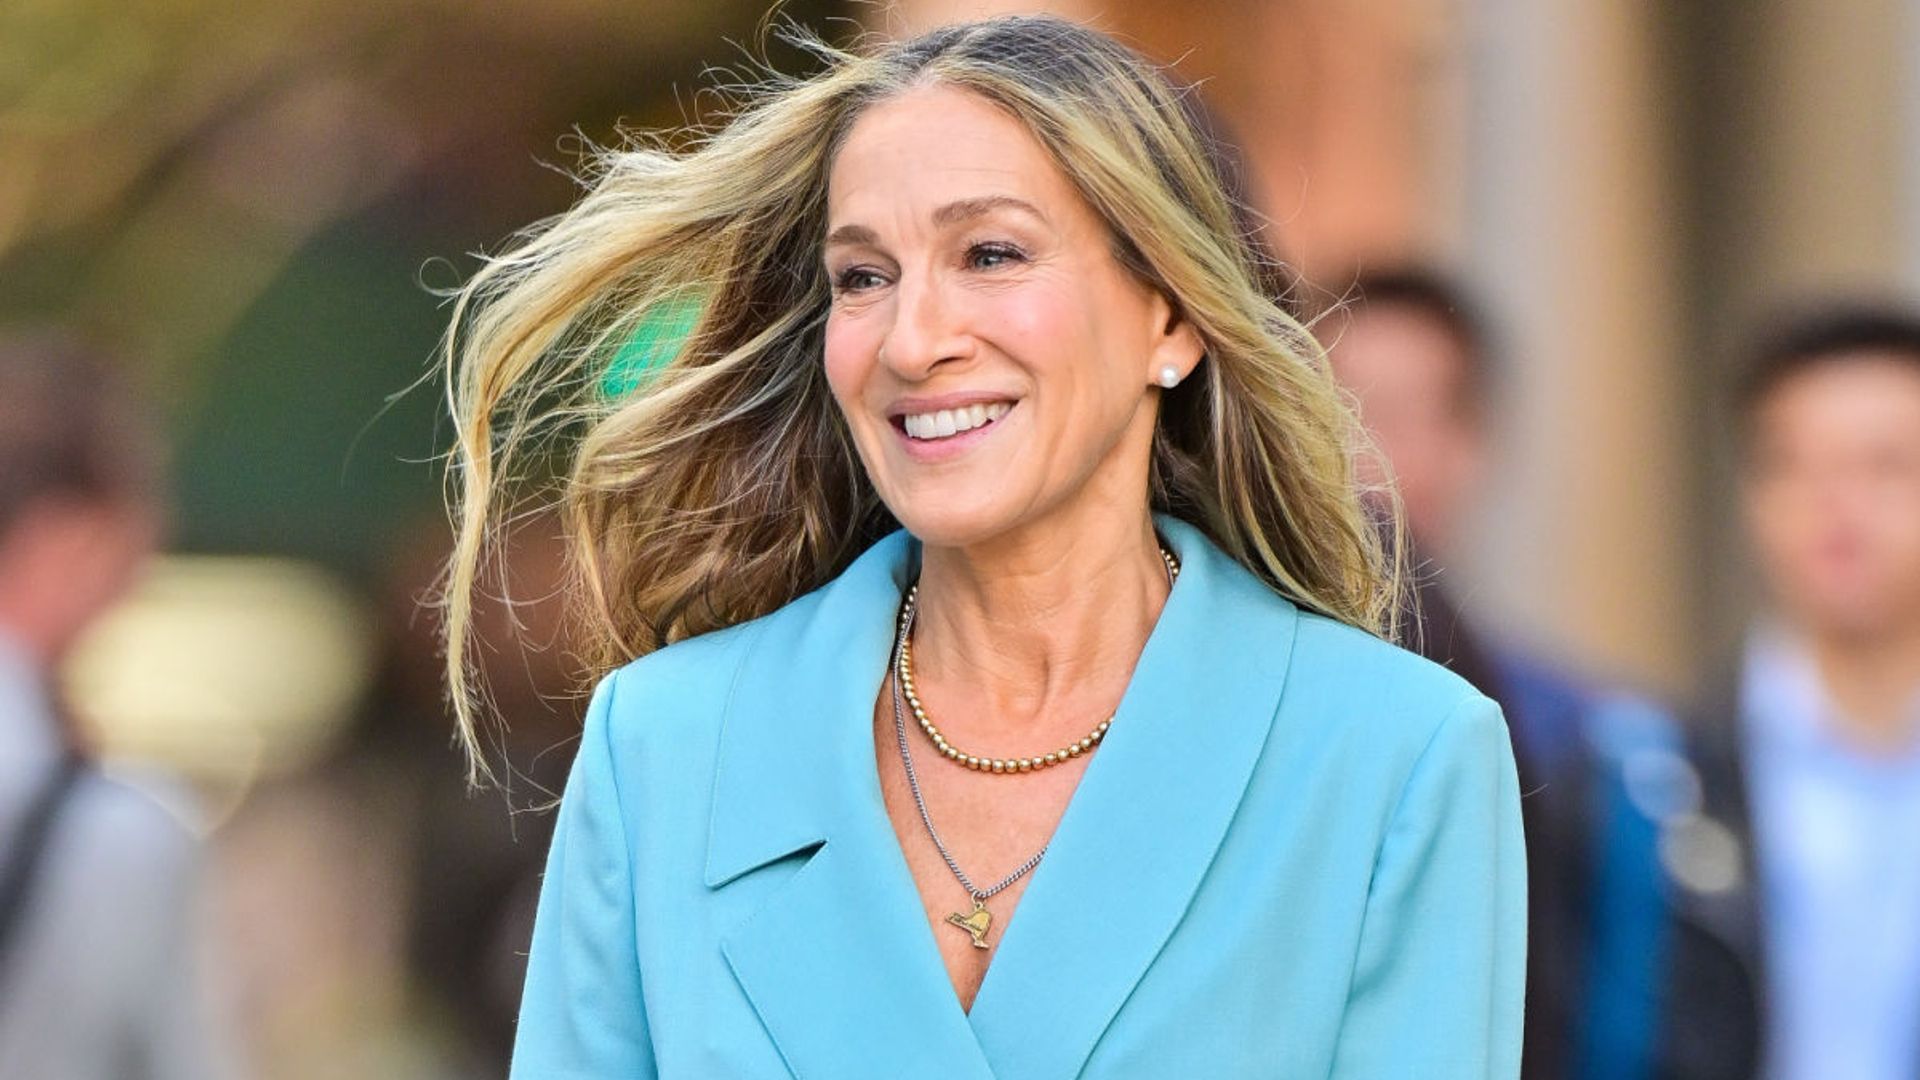 The real secret to Sarah Jessica Parker's glow